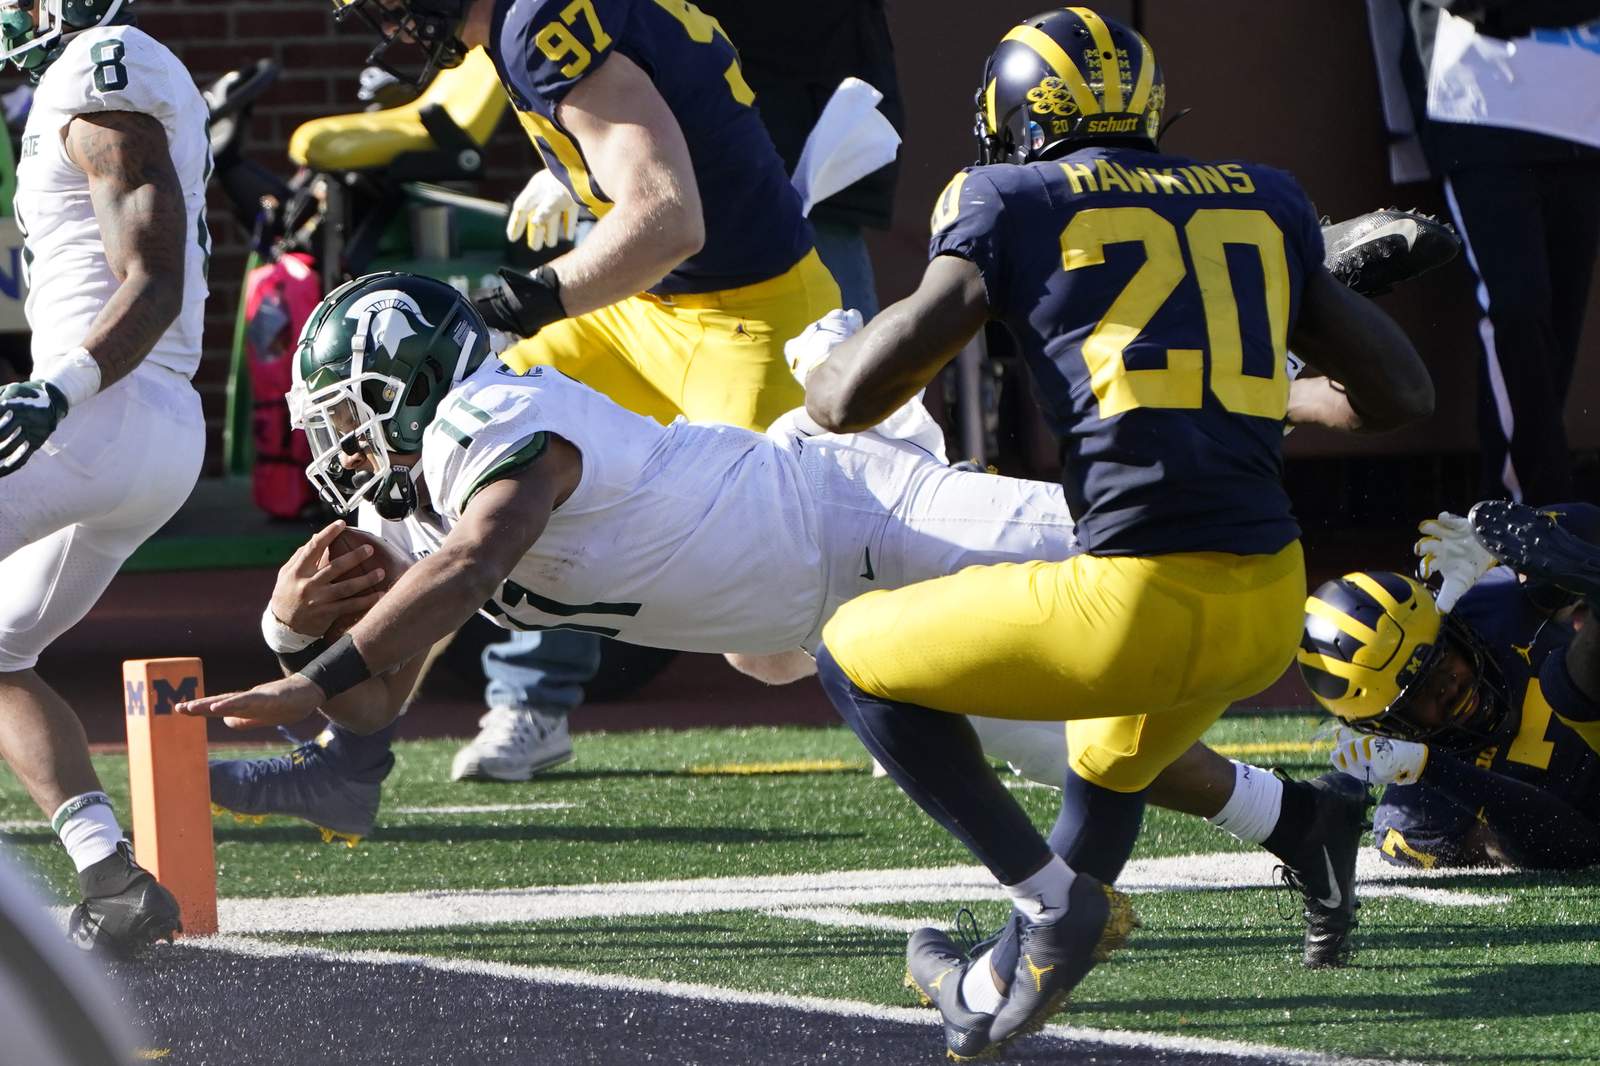 Where does this year’s MSU game rank among Michigan’s most devastating losses under Jim Harbaugh?